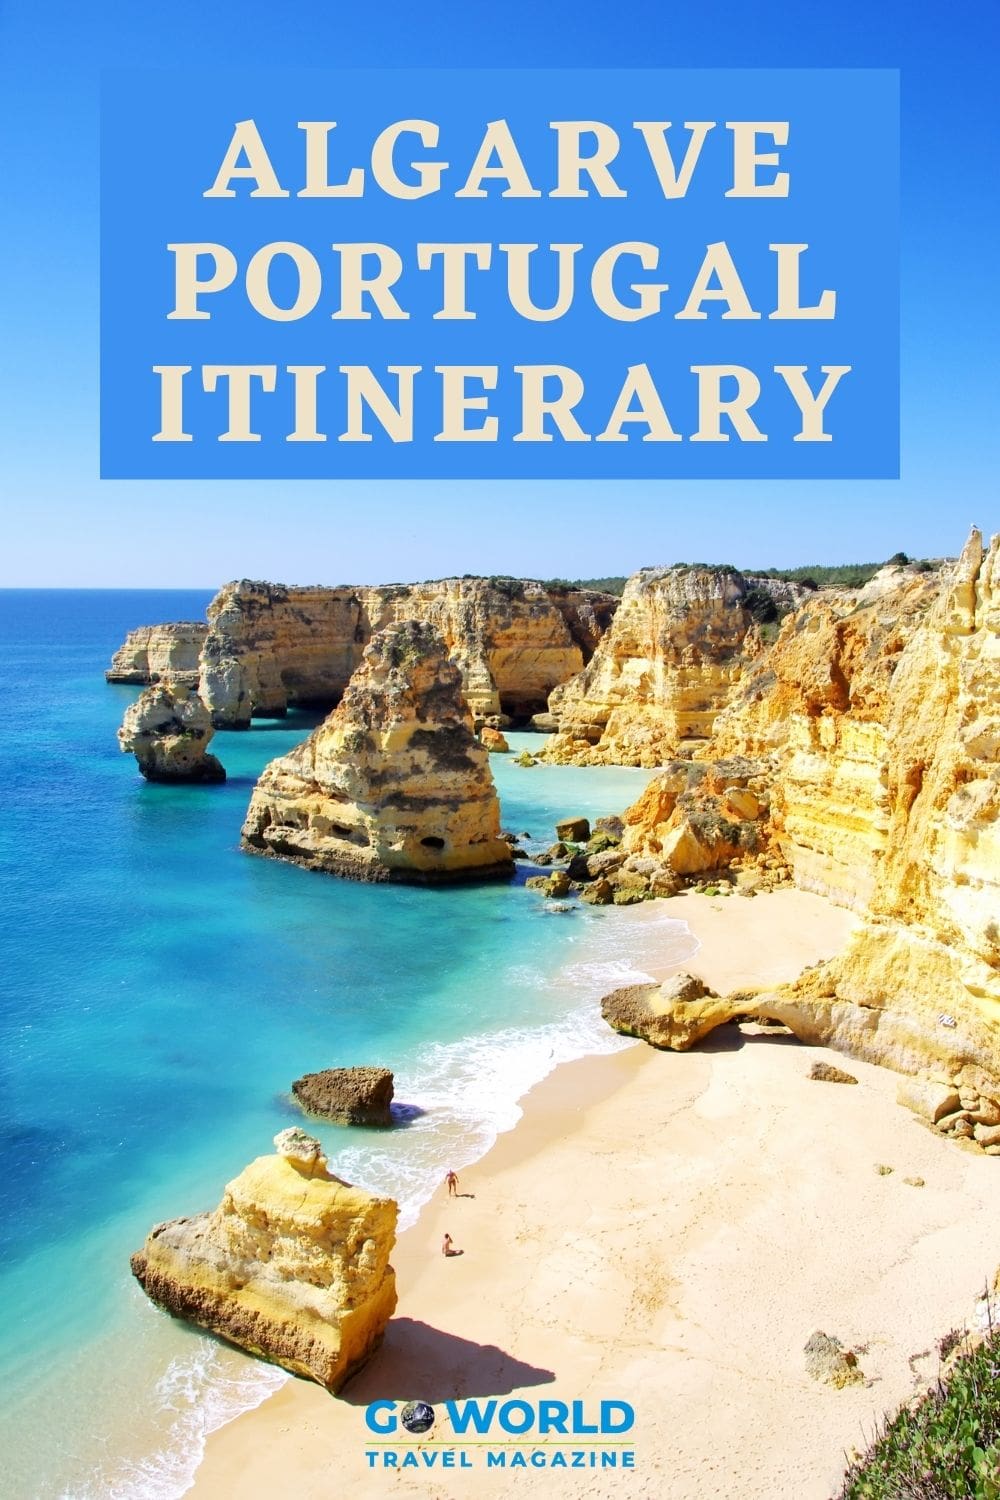 Discover Algarve, Portugal on a coastal road trip featuring sandy beaches, turquoise waters, cliffs, rock formations and picturesque villages. #Algarveportugal 